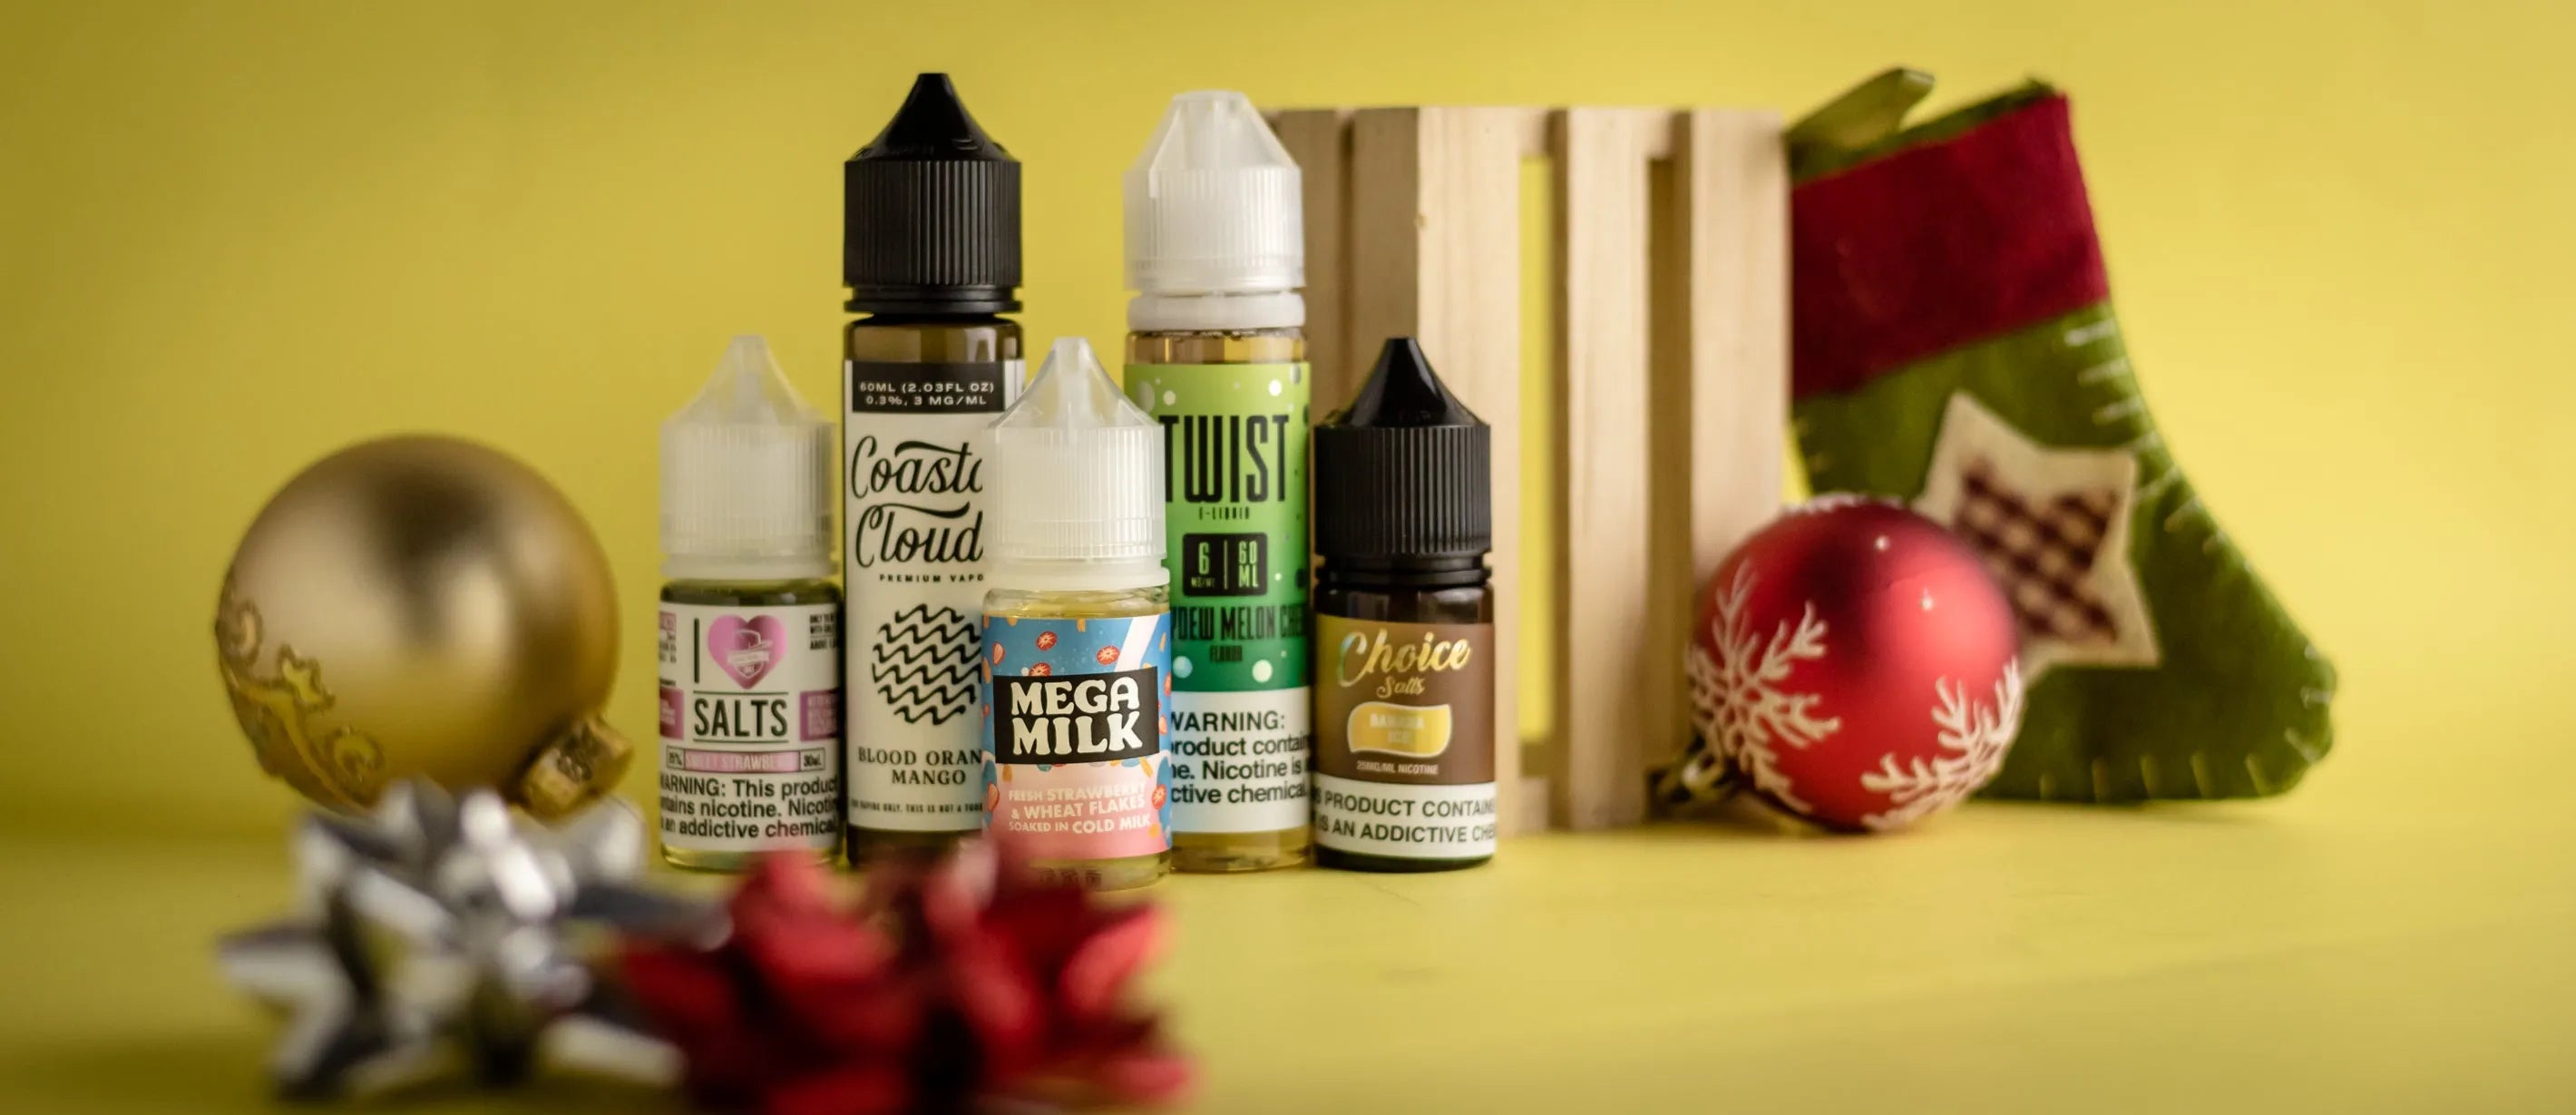 TOP 10 Best-selling Vape Juice of 2020 --- approved by VaporDNA customers!